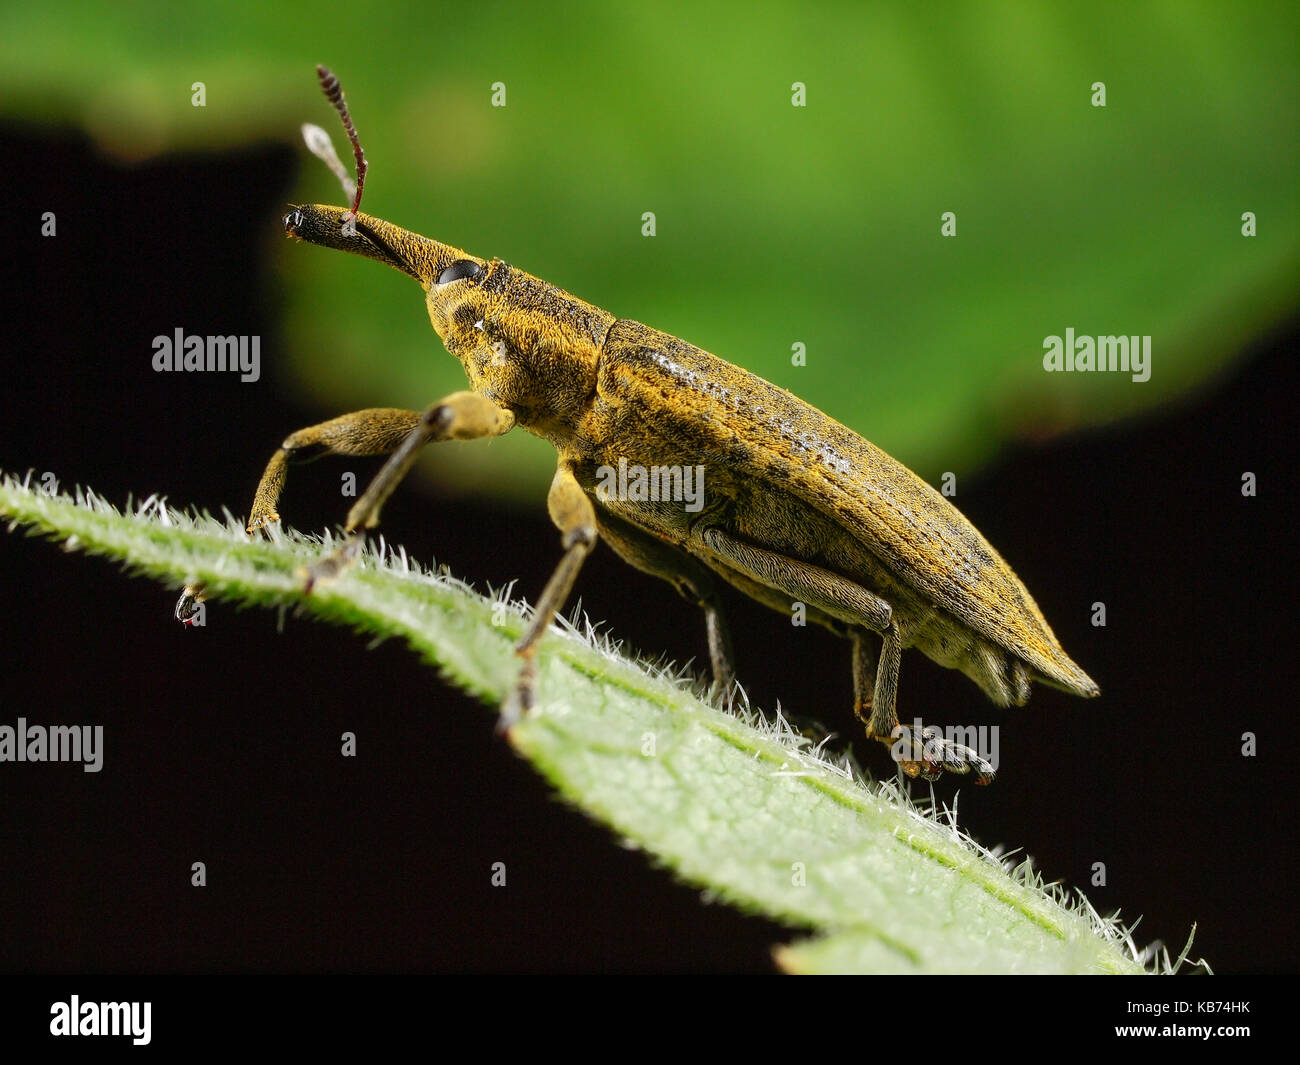 Yellow Weevil (Lixus iridis) close-up on a leaf, France Stock Photo